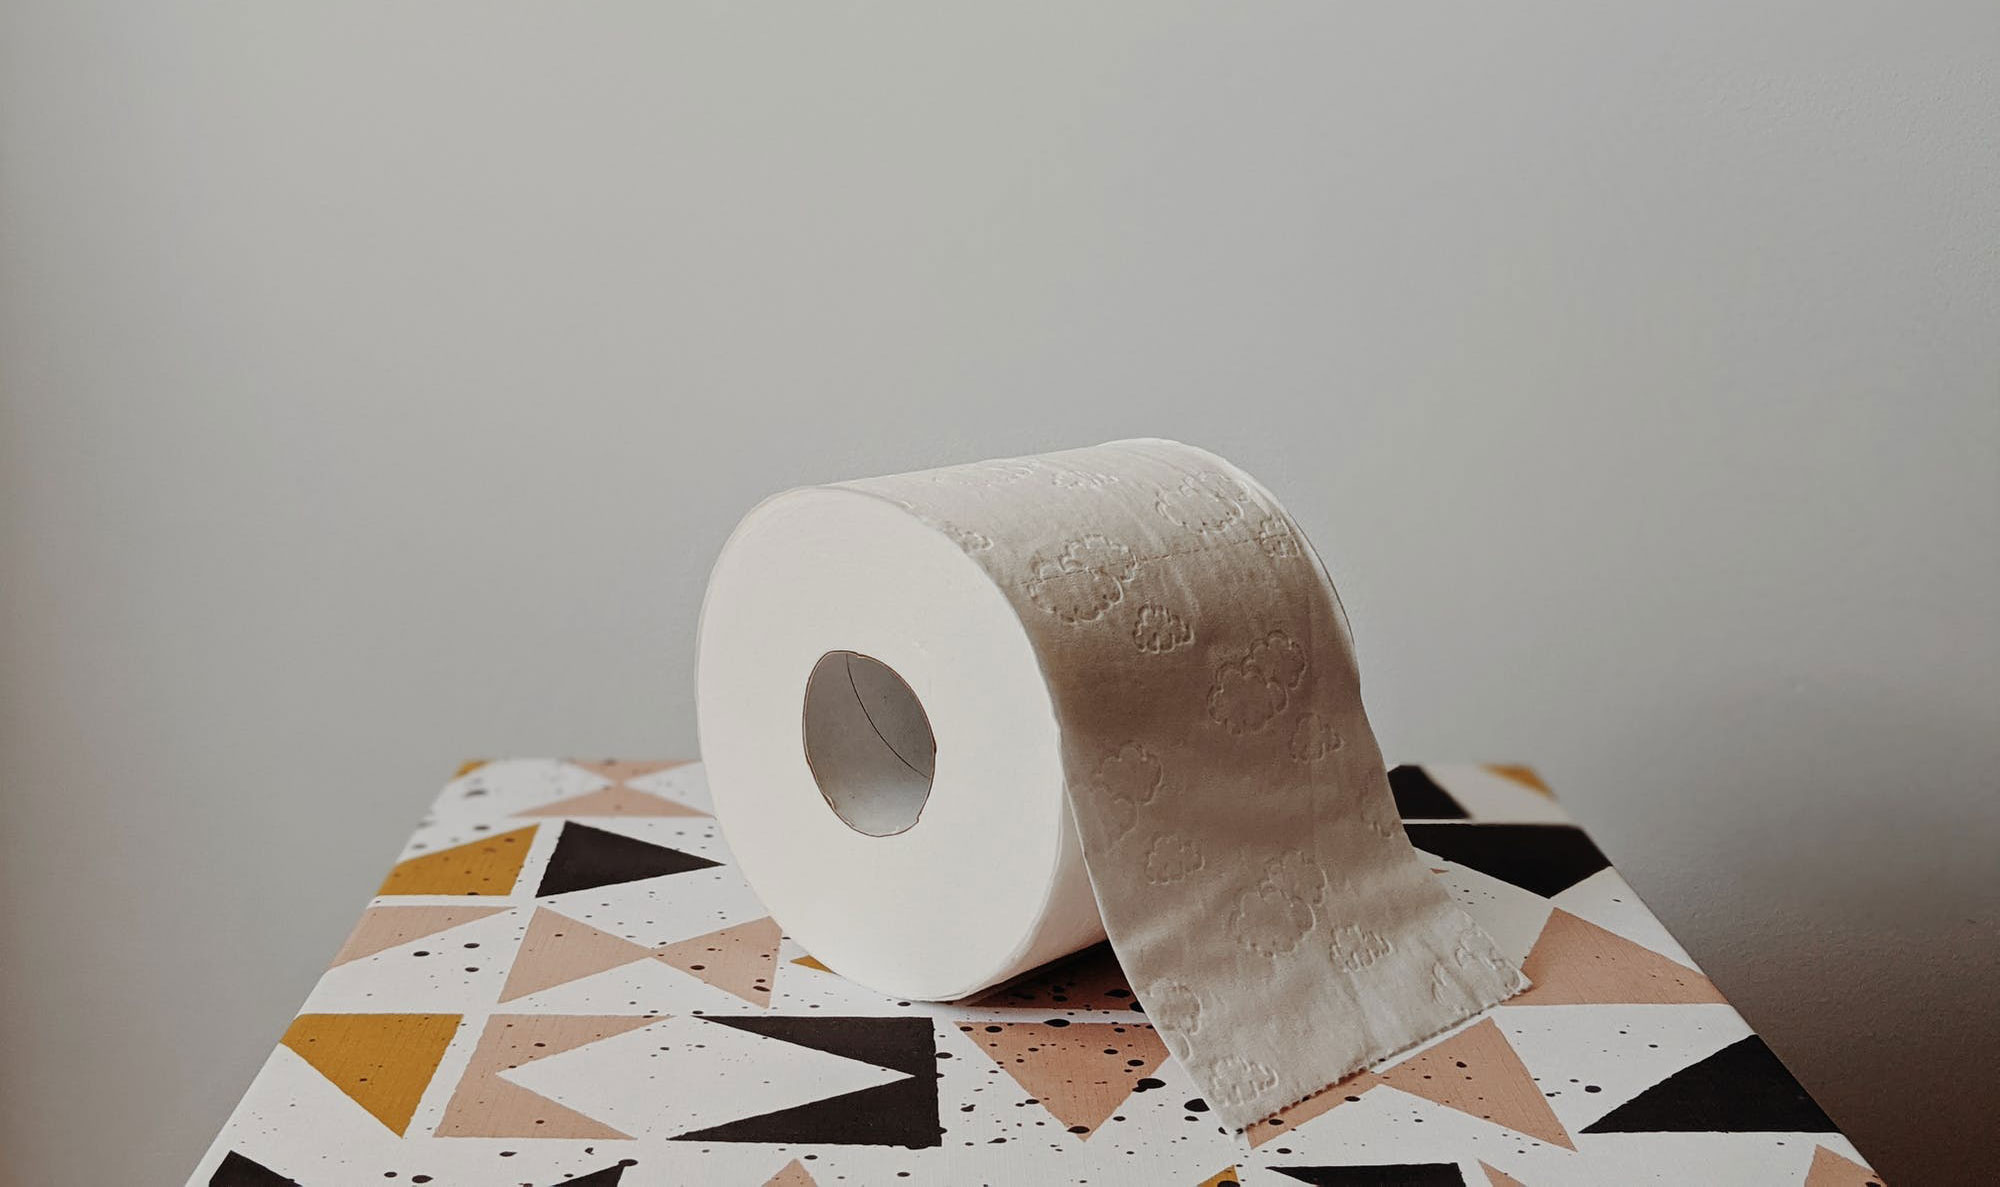 A toilet paper roll is positioned on the toilet bowl to suggest constipation.